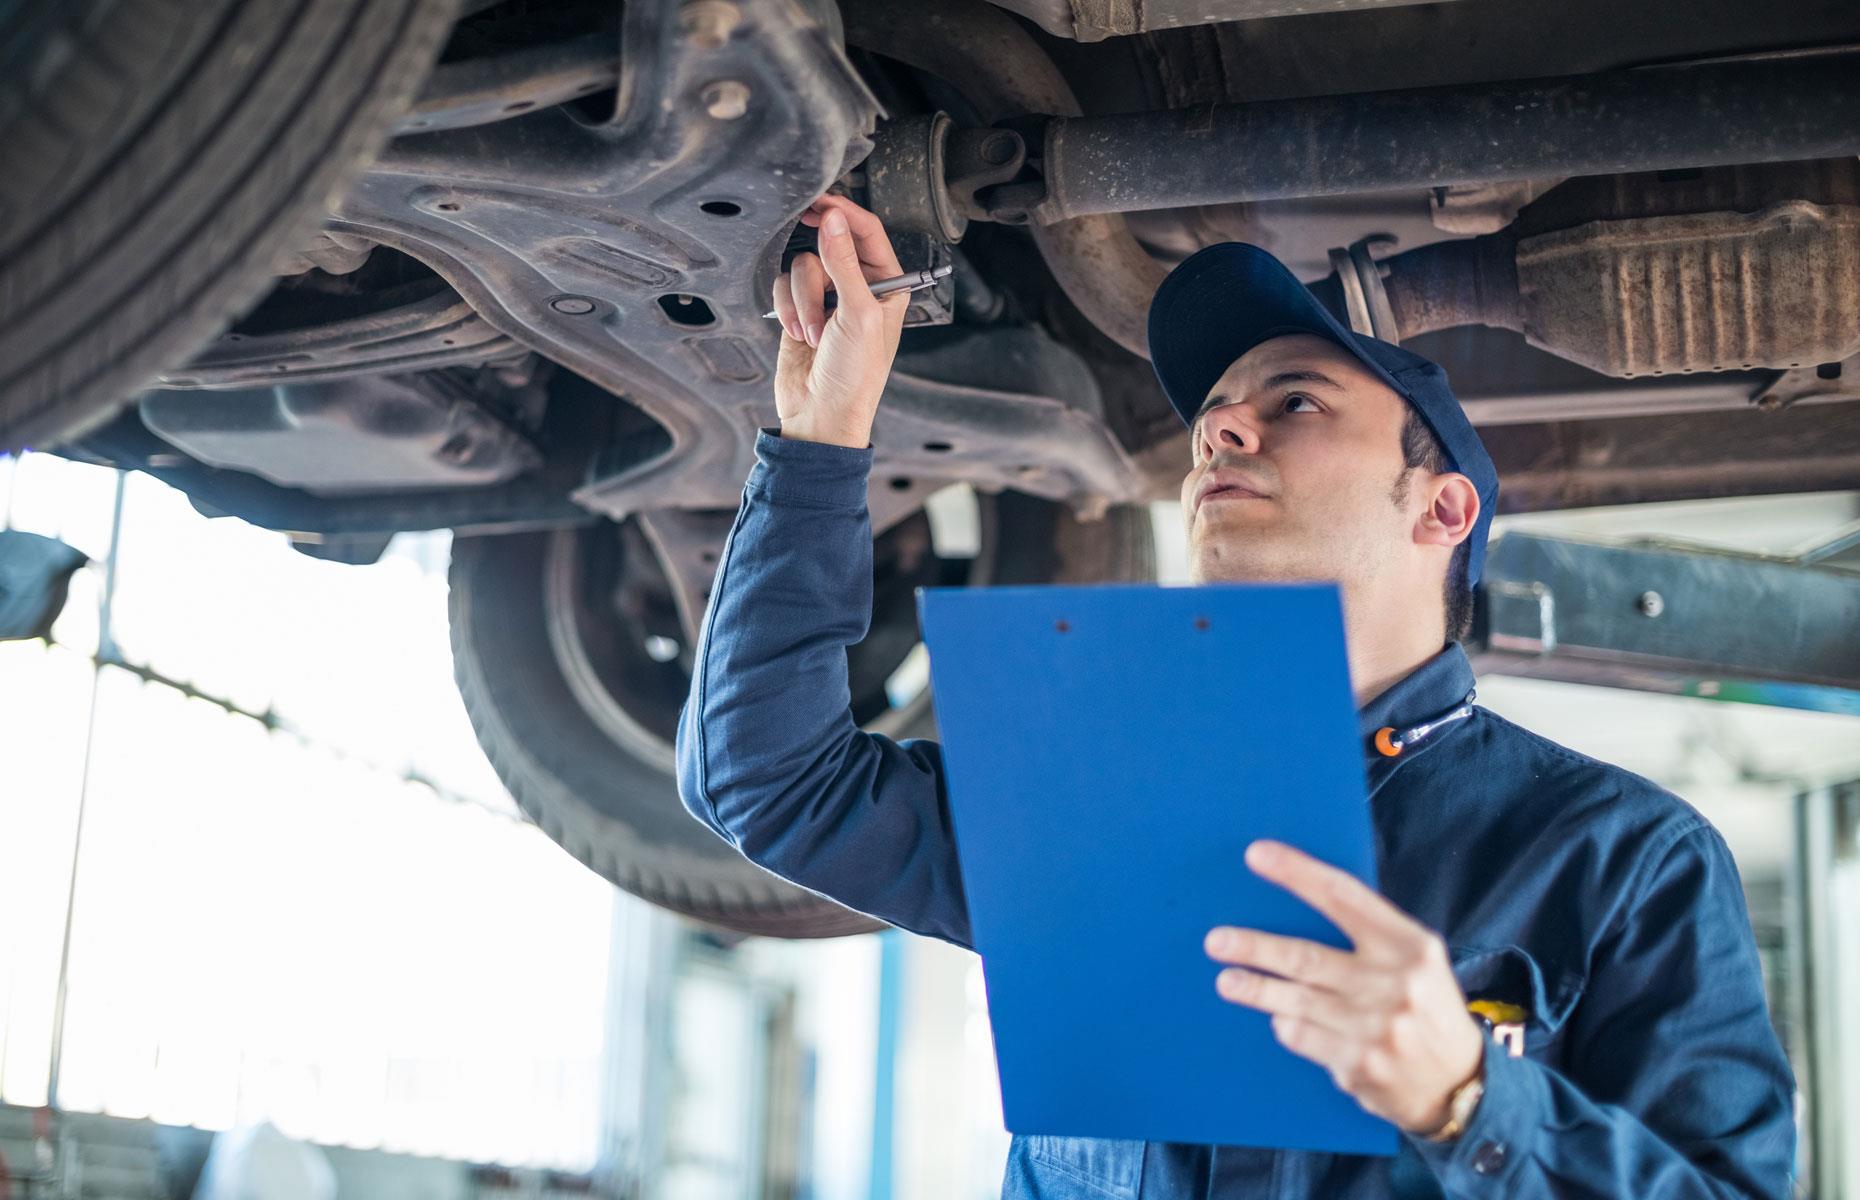 The rich spend 1.8% of their income on vehicle maintenance and repairs